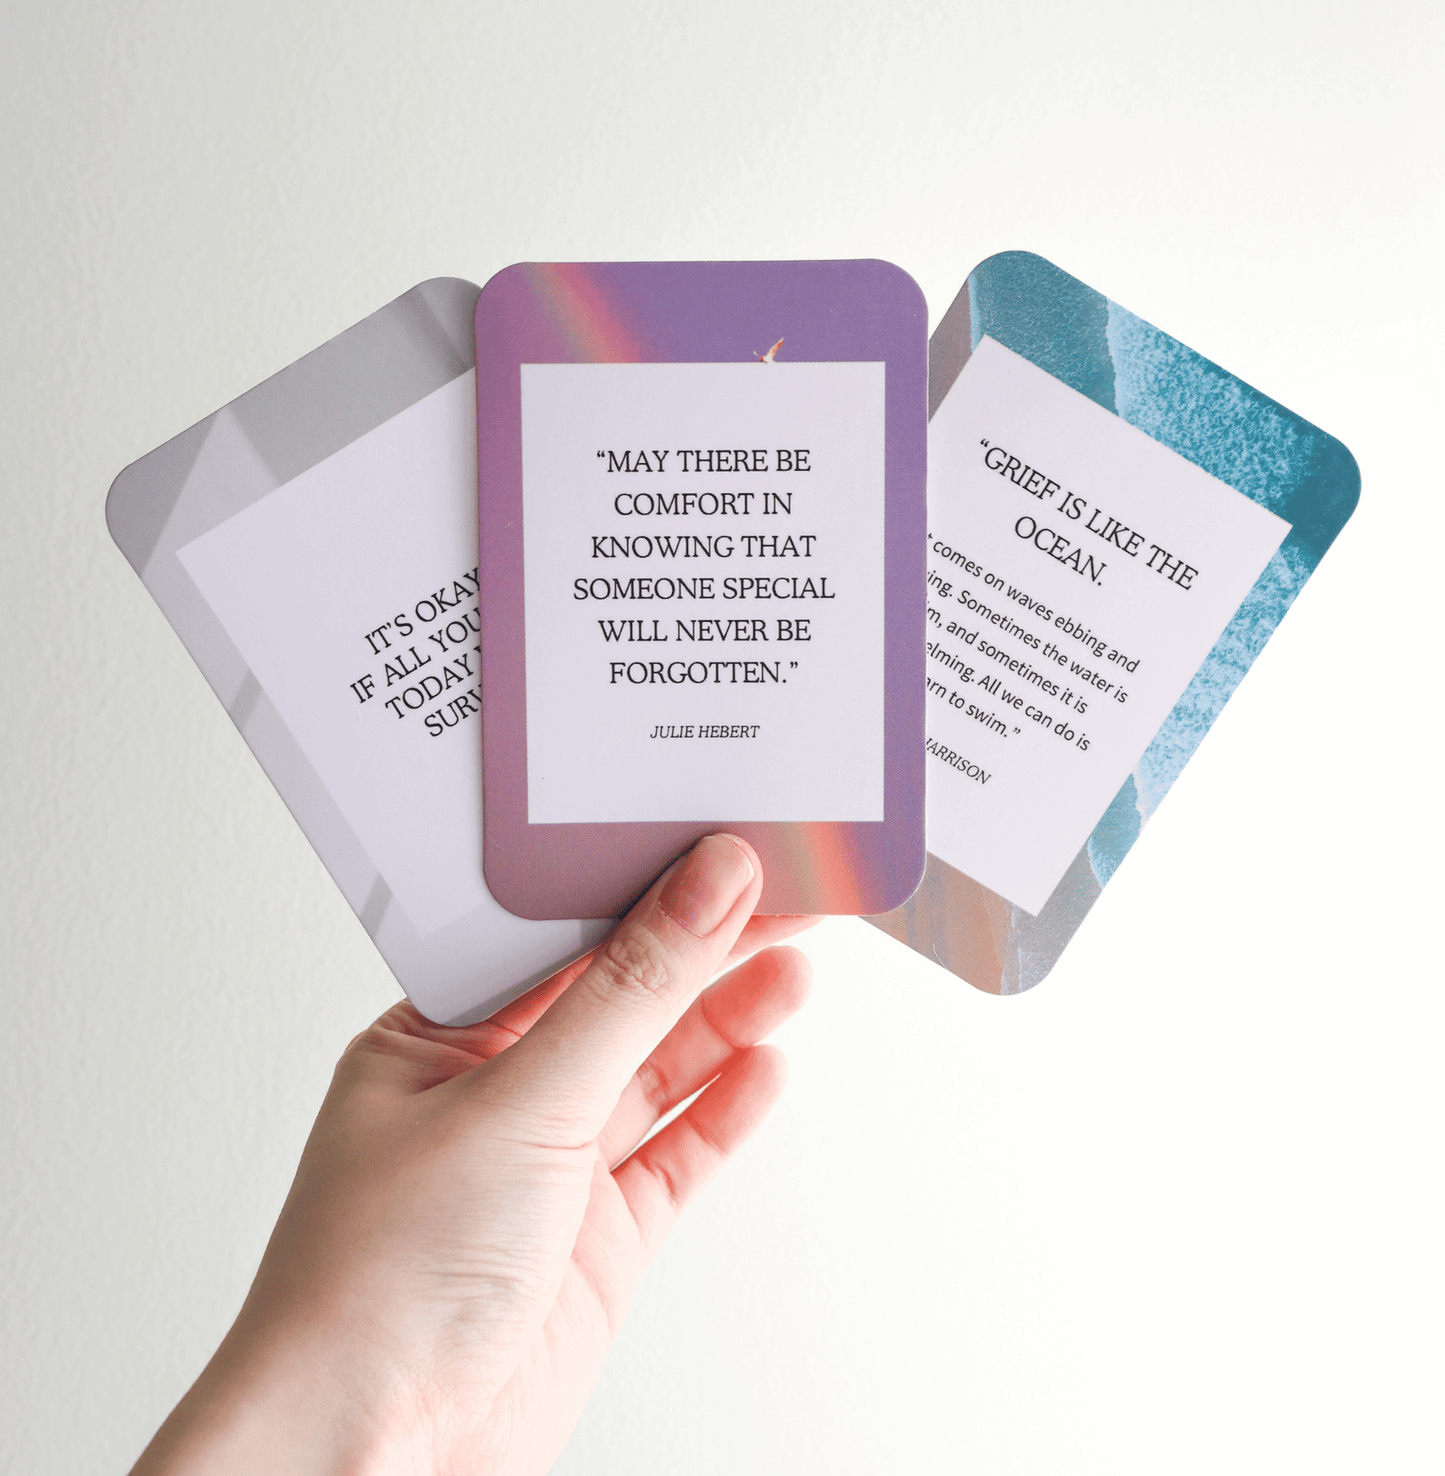 My Mourning Heart Cards: 30 Cards with Messages of Comfort and Affirmation for Grief and Loss